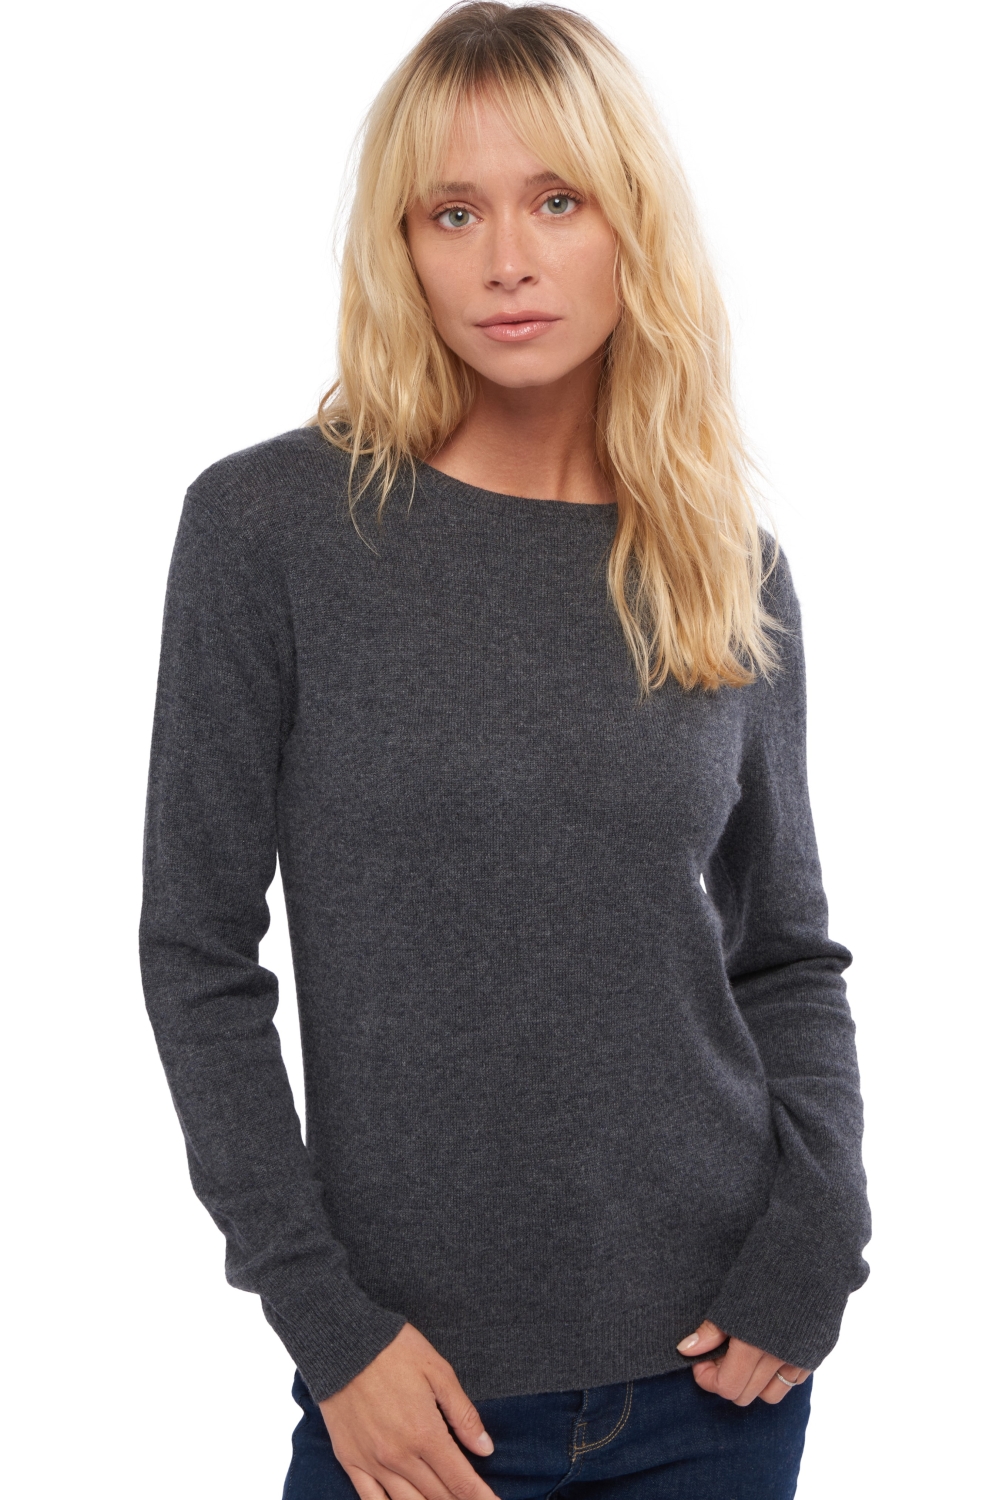 Cashmere ladies basic sweaters at low prices thalia first dark grey s